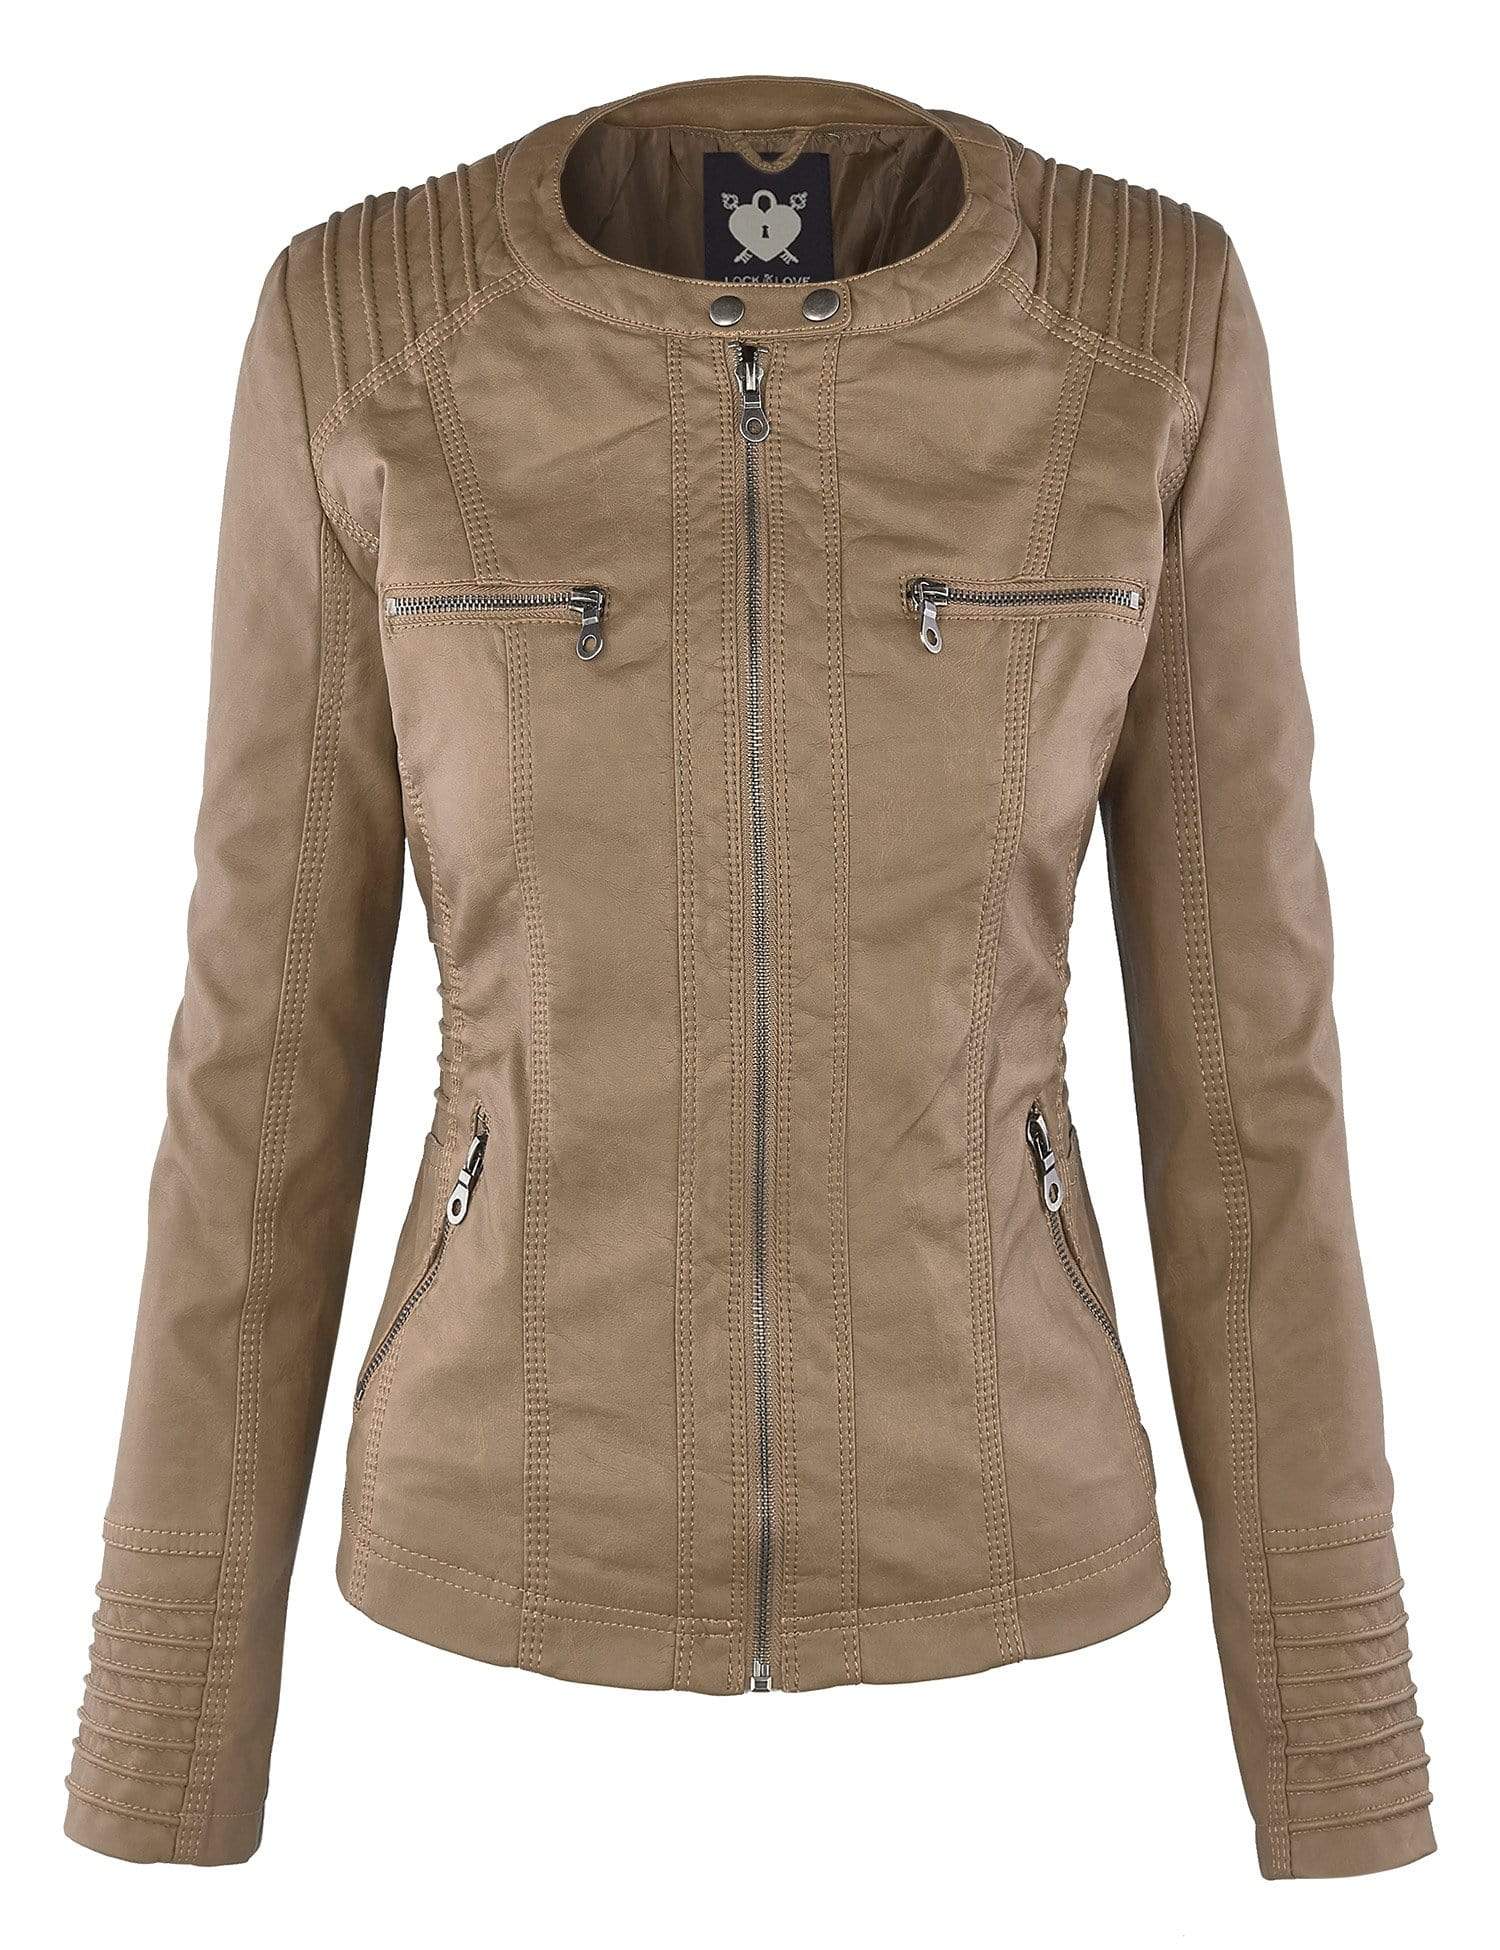 Made by Johnny Women's Faux Leather Jacket with Hoodie XS KHAKI